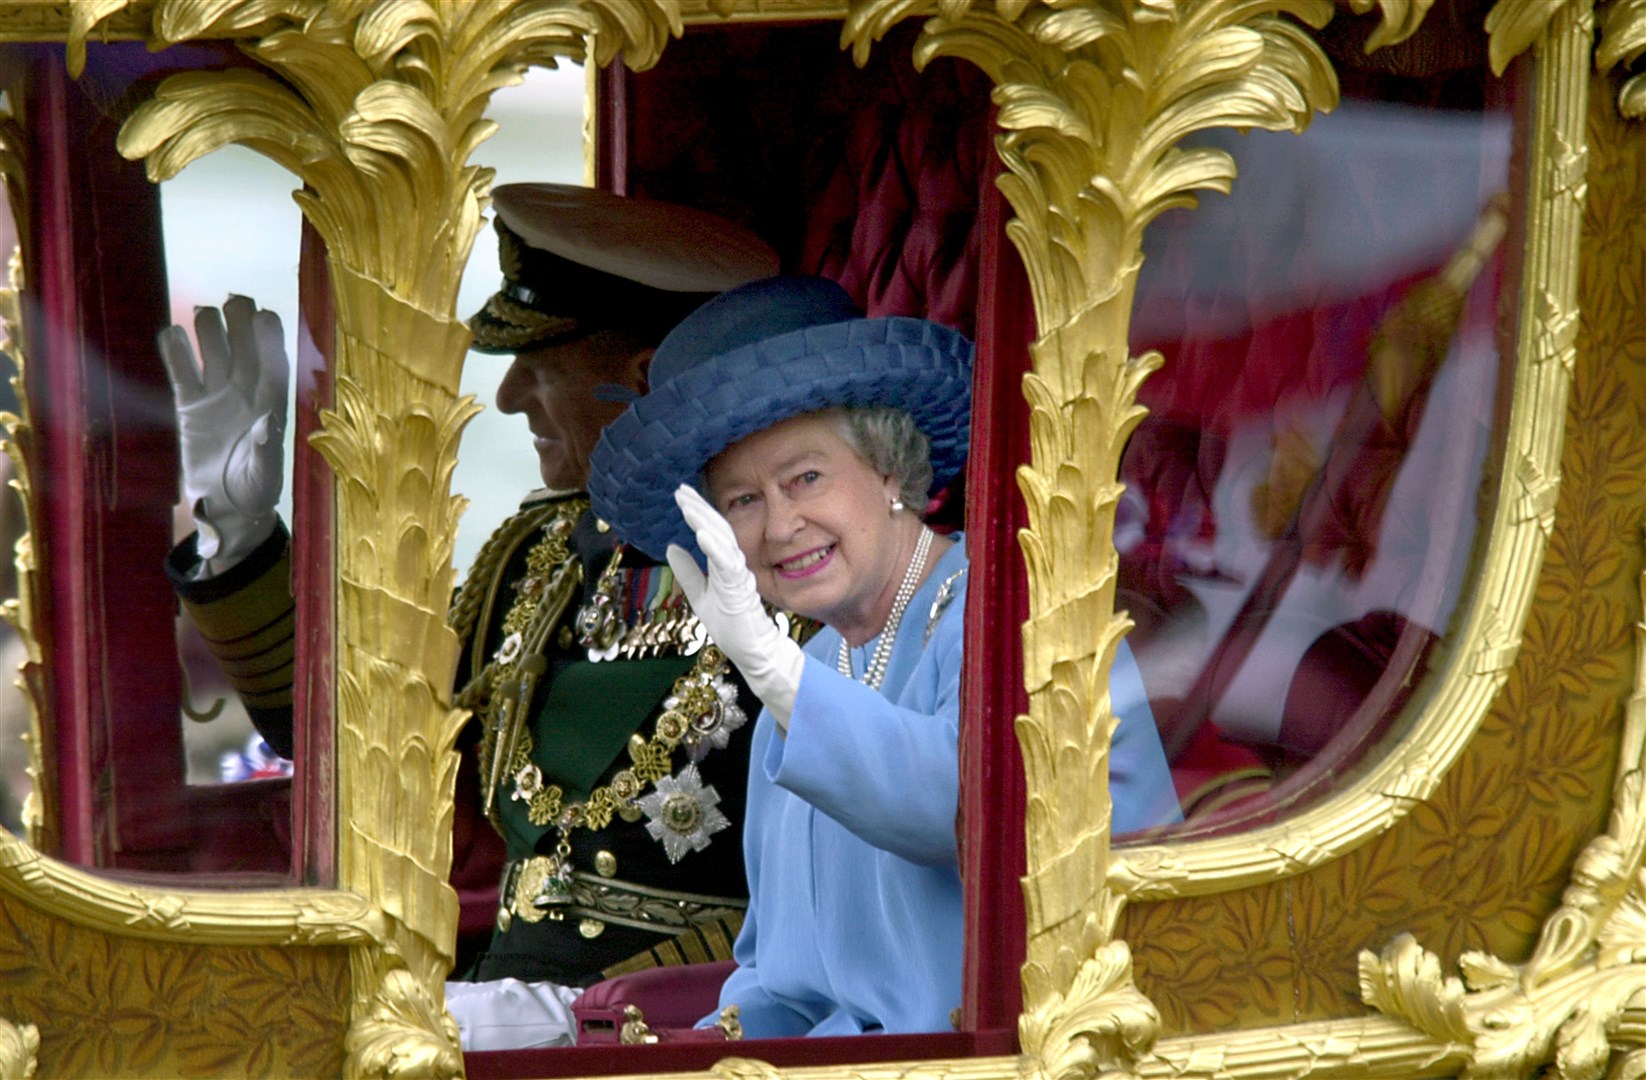 The Queen rode in the coach in 2002 (PA)